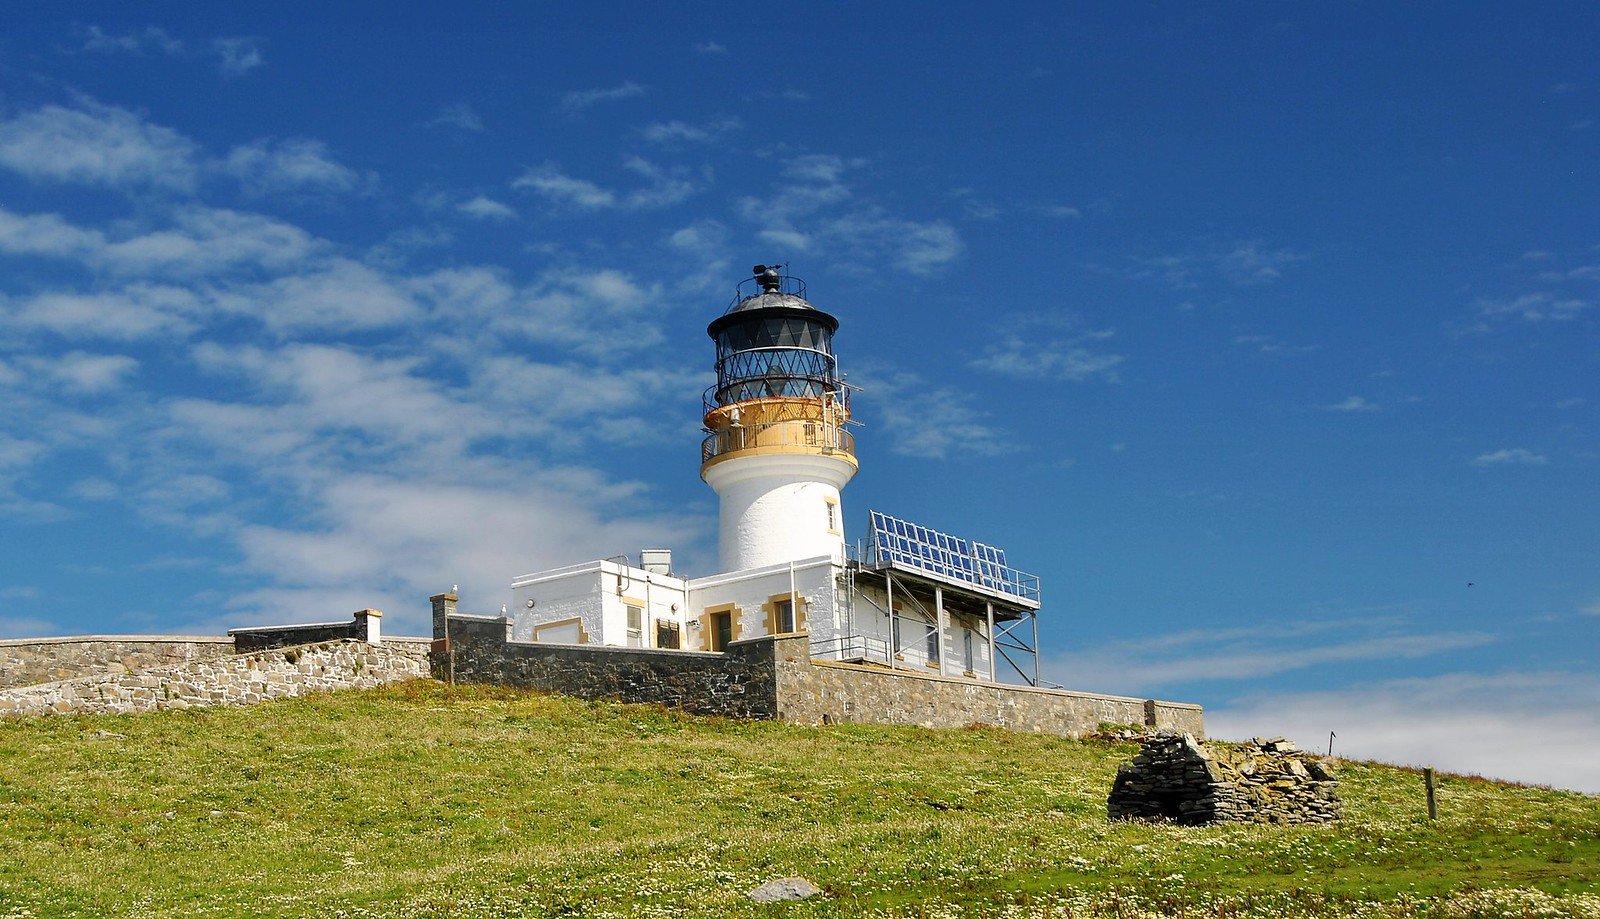 A photo realistic image of a white lighthouse with a black top and a solar panel on a grassy hill under a blue sky.